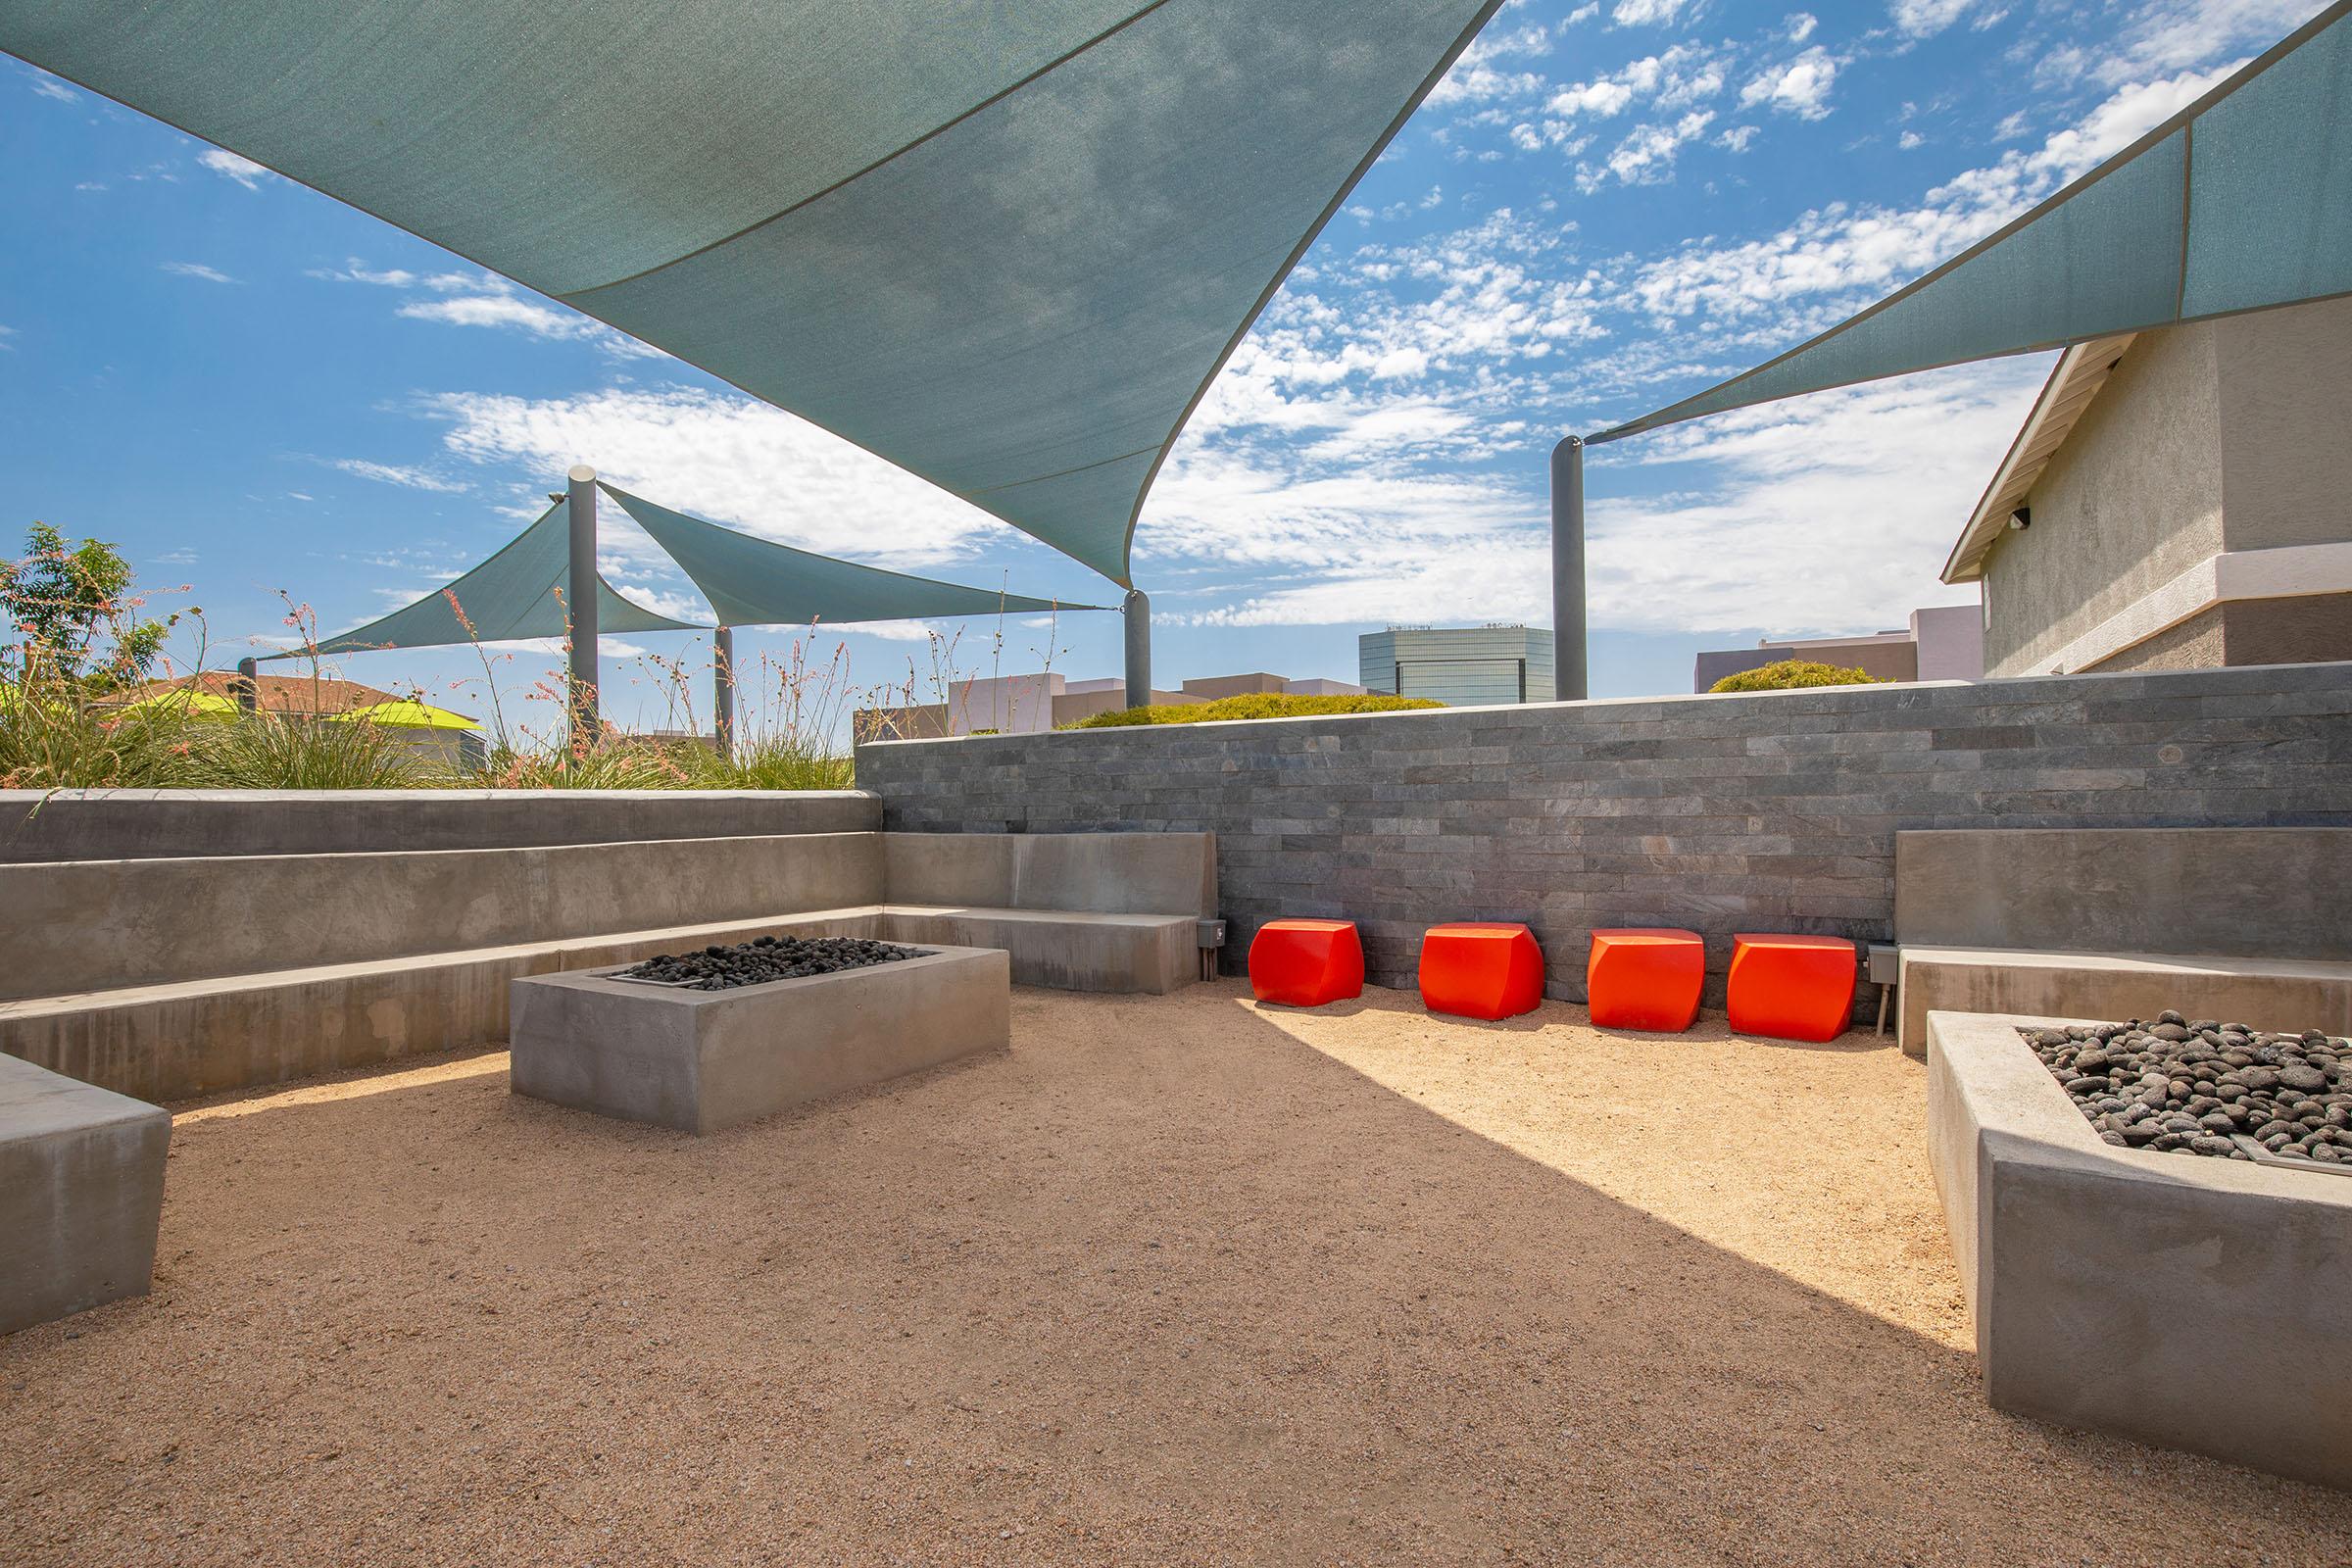 Outdoor patio with sunshade coverings and large fire pits